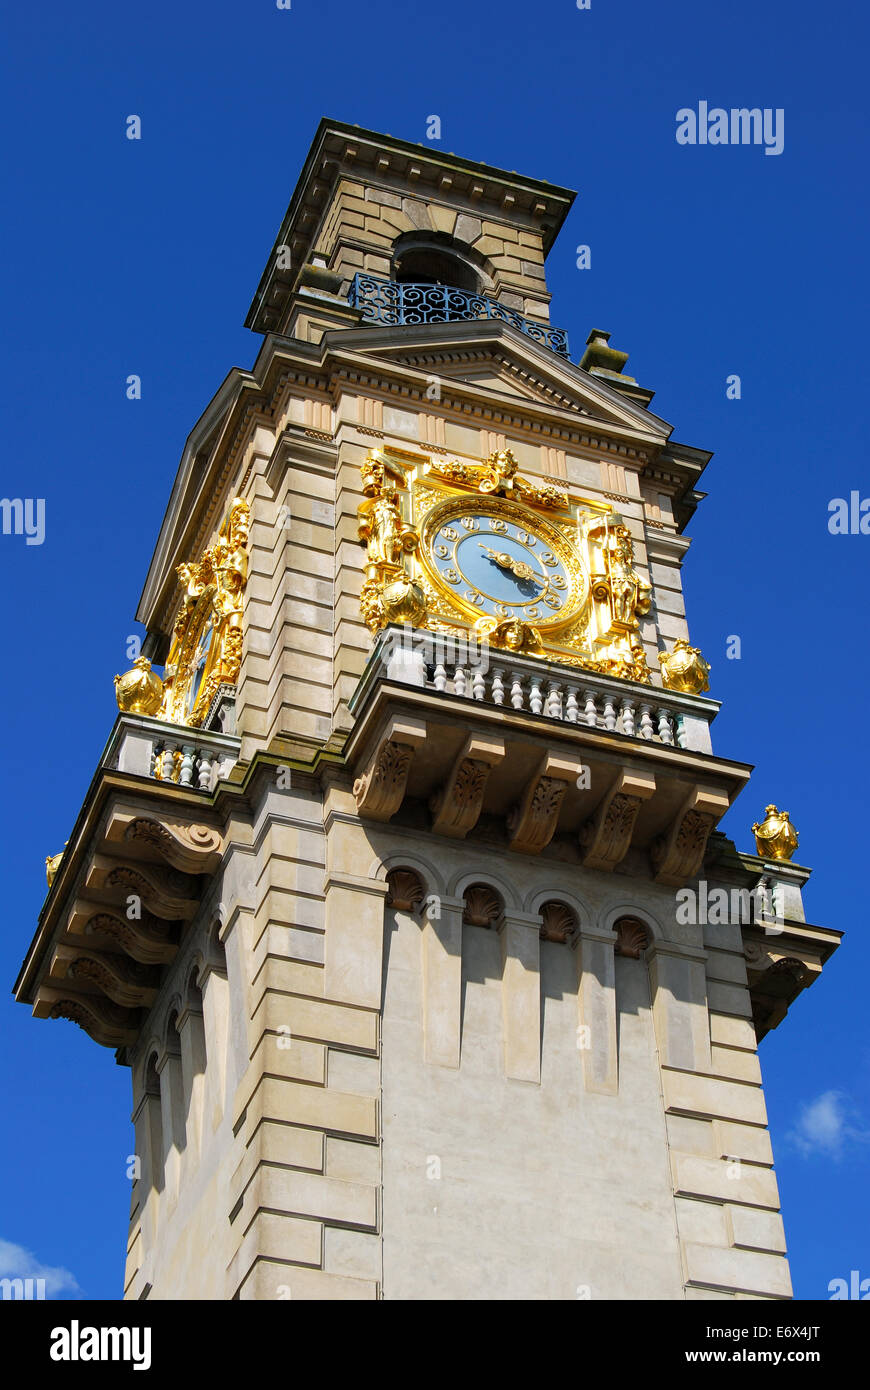 Gilded clock face on clock tower, Cliveden, Taplow, Buckinghamshire, England, United Kingdom Stock Photo